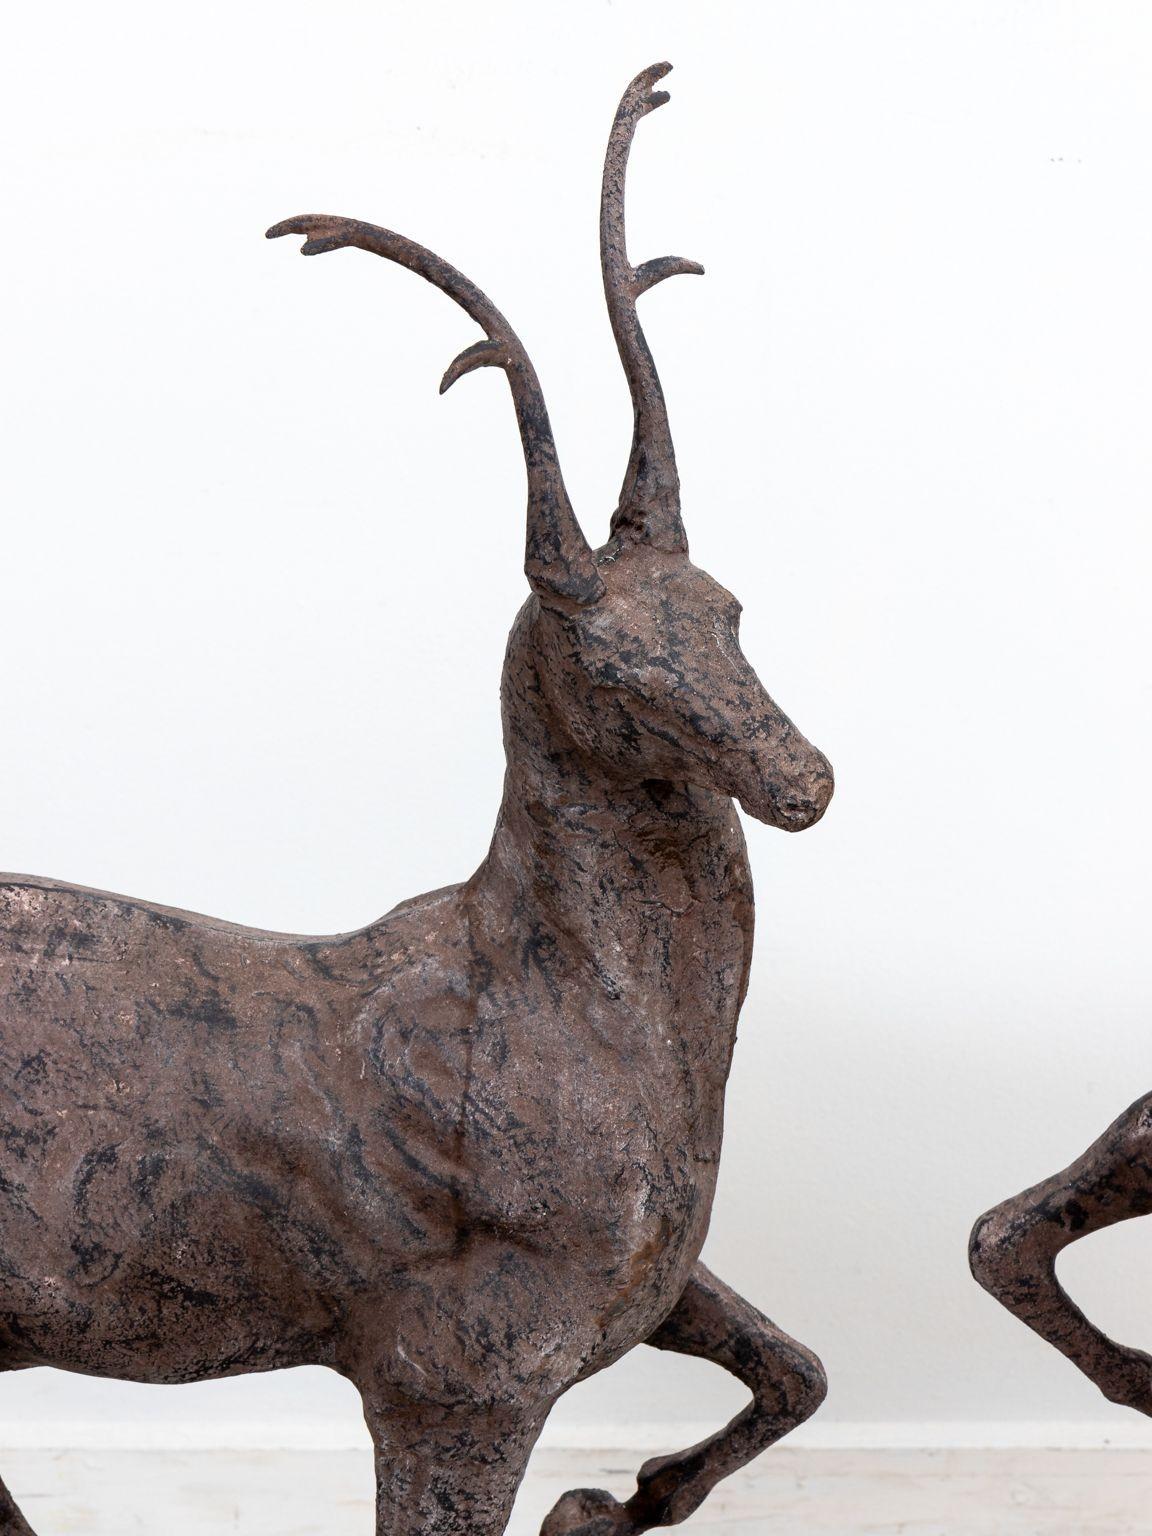 A pair of garden ornaments in the shape of deer or stags on globes. The deer are made of metal and are mirror images of one another. One front leg is elegantly lifted. Beautifully detailed antlers rise from the deer's heads. These are late 20th